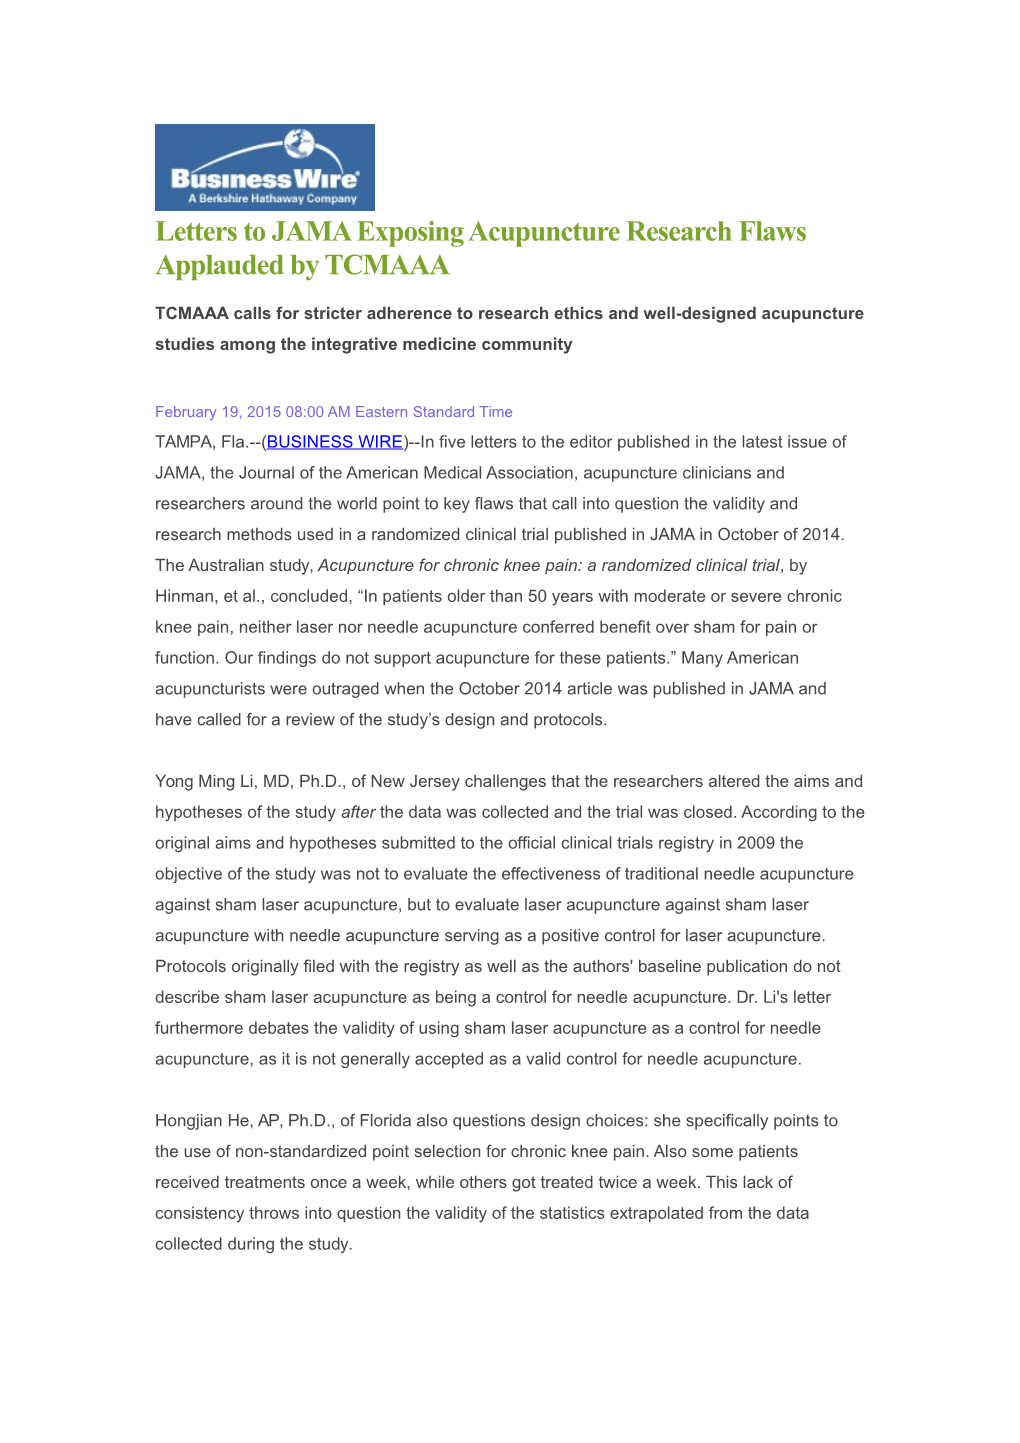 Letters to JAMA Exposing Acupuncture Research Flaws Applauded by TCMAAA